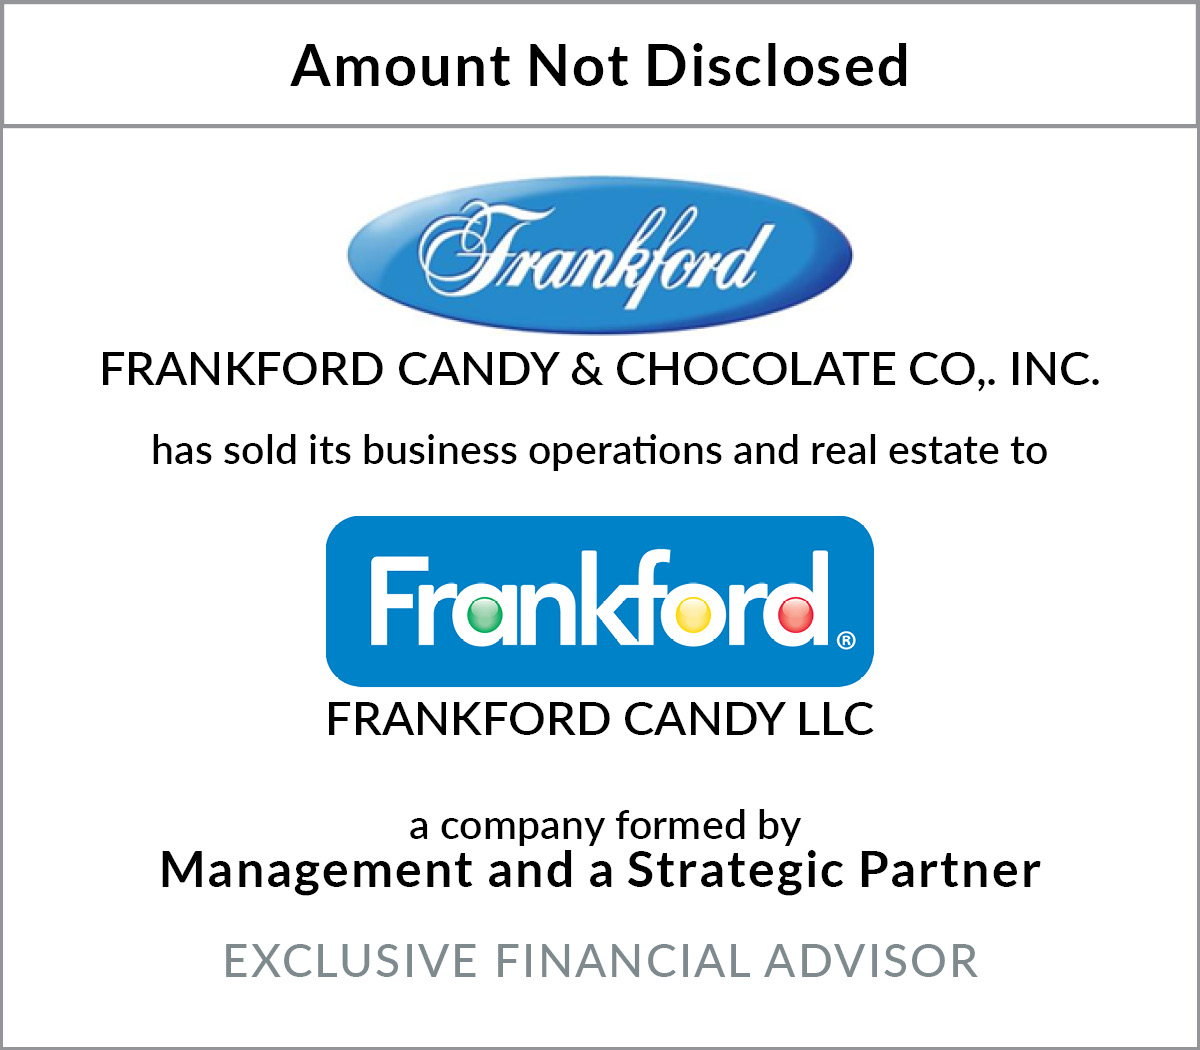 BPC advises Frankford Candy & Chocolate Co., Inc. in a Management Buyout and Recapitalization